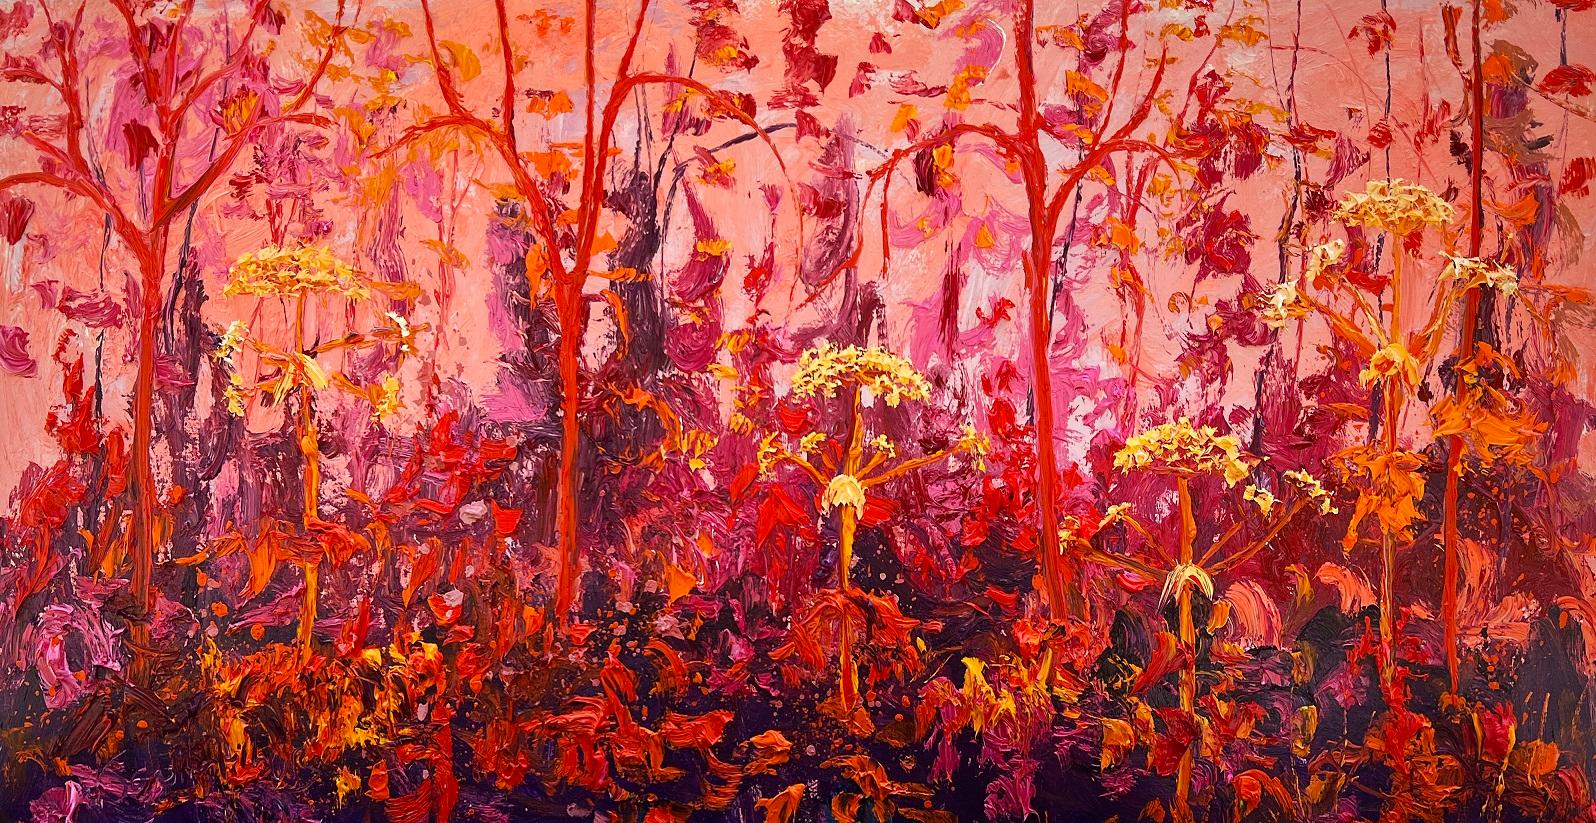 Gertjan Scholte-Albers Landscape Painting - Red Small Hogweed Oil Painting Canvas Plein Air Outdoor Expressionism In Stock